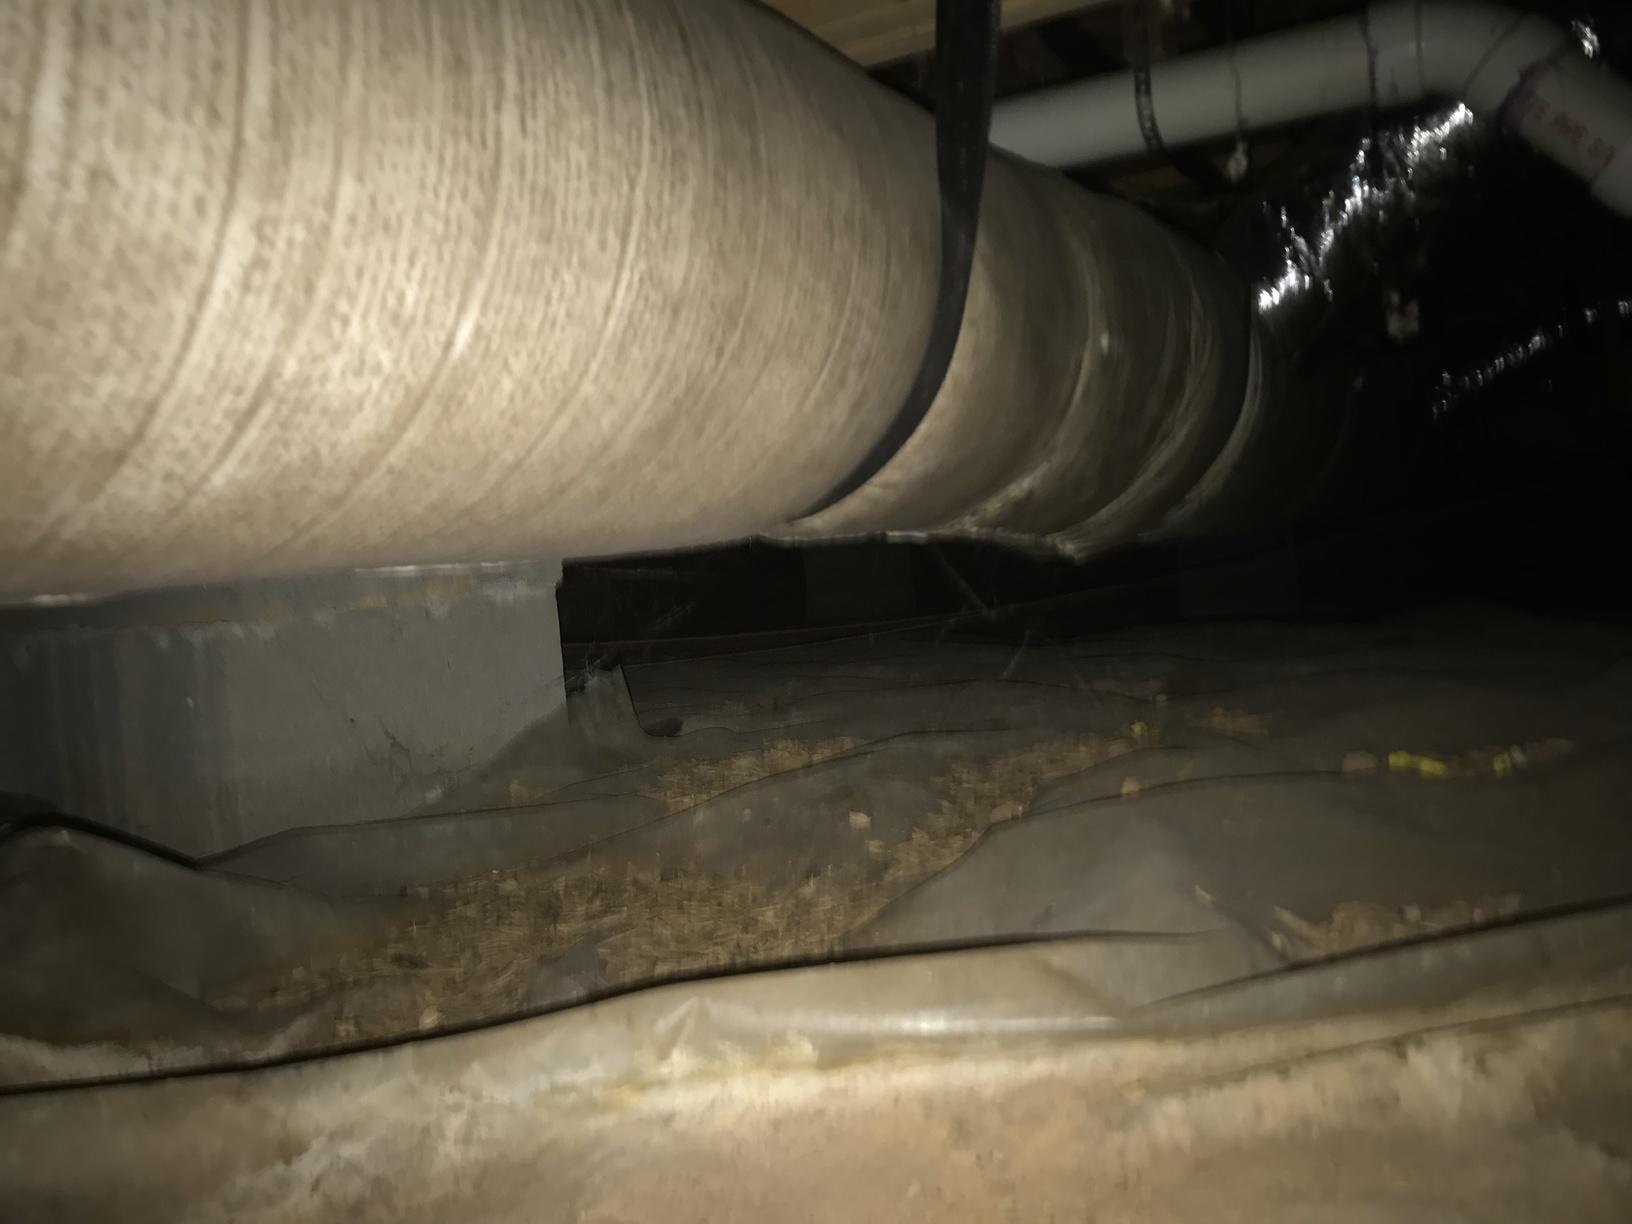 Debris and exposed soil in a crawl space that isn't encapsulated